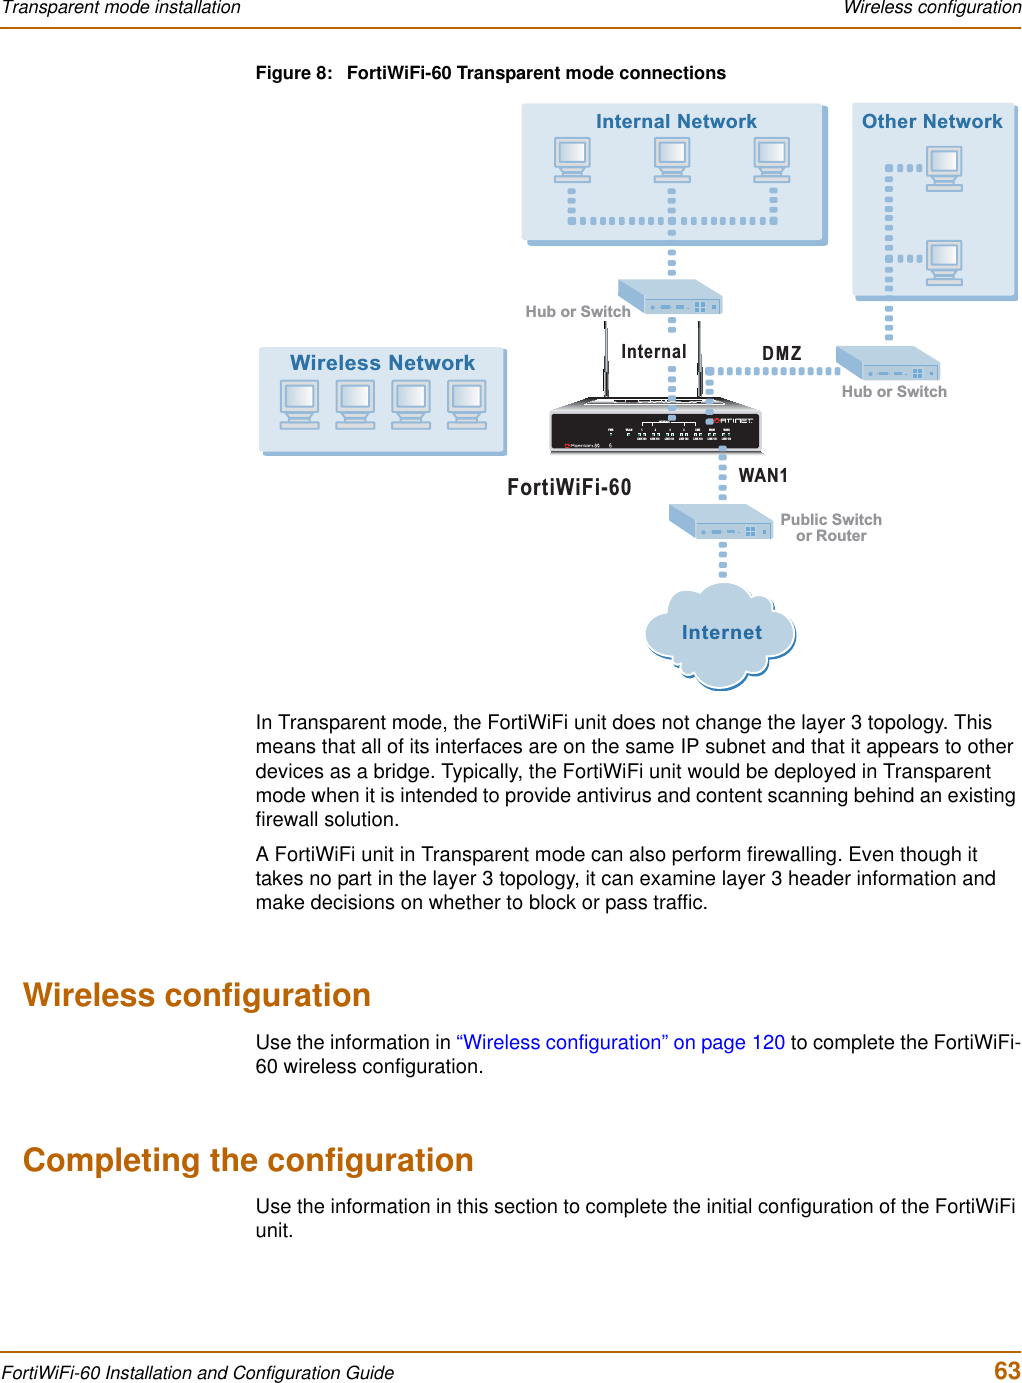 Transparent mode installation  Wireless configurationFortiWiFi-60 Installation and Configuration Guide  63Figure 8: FortiWiFi-60 Transparent mode connectionsIn Transparent mode, the FortiWiFi unit does not change the layer 3 topology. This means that all of its interfaces are on the same IP subnet and that it appears to other devices as a bridge. Typically, the FortiWiFi unit would be deployed in Transparent mode when it is intended to provide antivirus and content scanning behind an existing firewall solution. A FortiWiFi unit in Transparent mode can also perform firewalling. Even though it takes no part in the layer 3 topology, it can examine layer 3 header information and make decisions on whether to block or pass traffic.Wireless configurationUse the information in “Wireless configuration” on page 120 to complete the FortiWiFi-60 wireless configuration.Completing the configurationUse the information in this section to complete the initial configuration of the FortiWiFi unit.INTERNALDMZ4321LINK 100 LINK 100 LINK 100 LINK 100 LINK 100 LINK 100 LINK 100WAN1 WAN 2PWR WLANInternetWAN1DMZFortiWiFi-60Internal Network Other NetworkHub or SwitchHub or SwitchPublic Switchor RouterInternalWireless Network